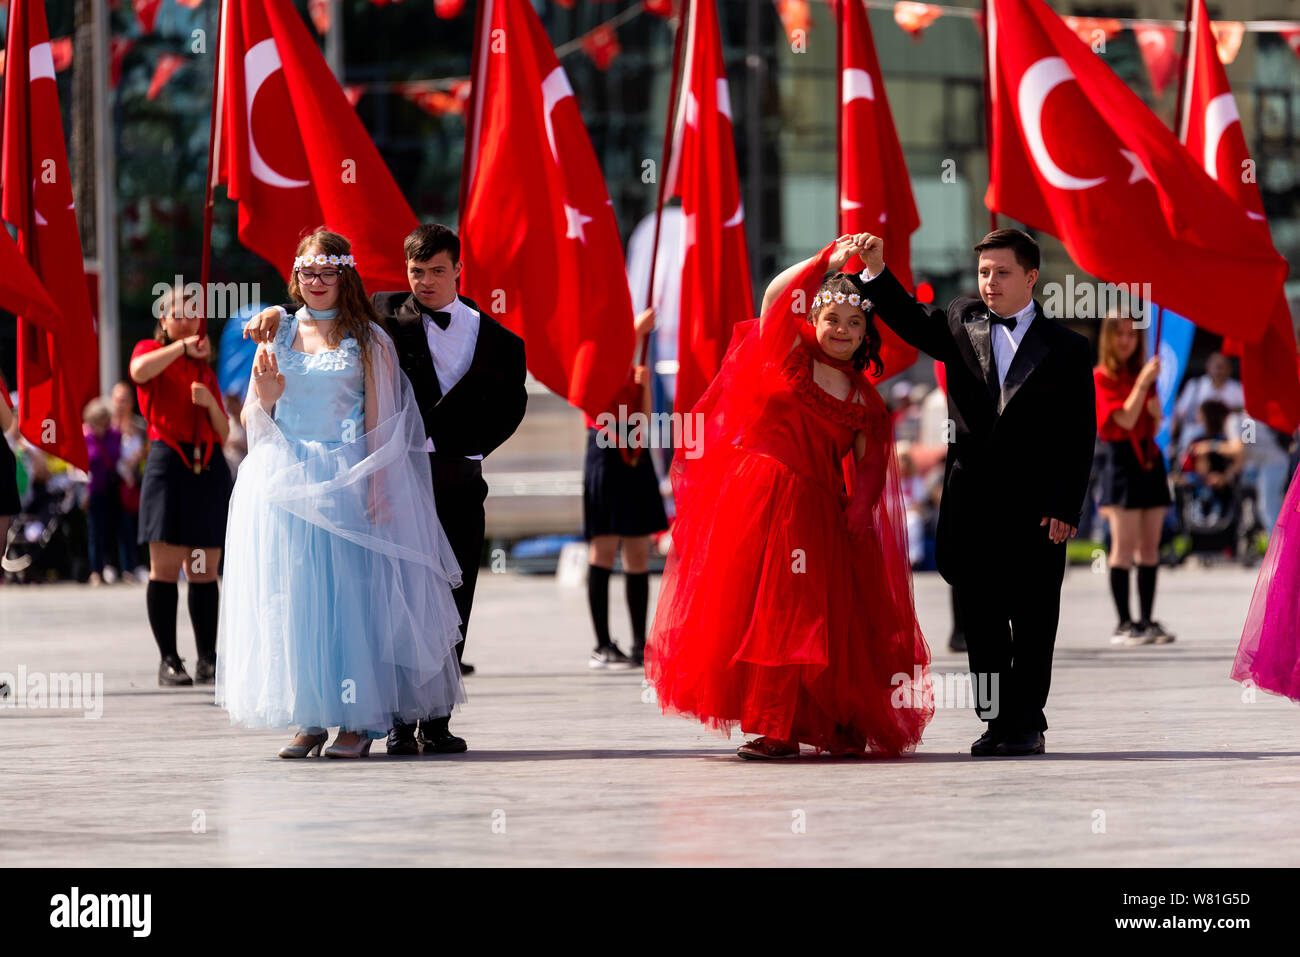 Izmir, Turkey - May 19 , 2019:  Down syndromed children’s dance performance Celebrations of the 19 May 2019 Memoriam of Mustafa Kemal Ataturk, Youth a Stock Photo